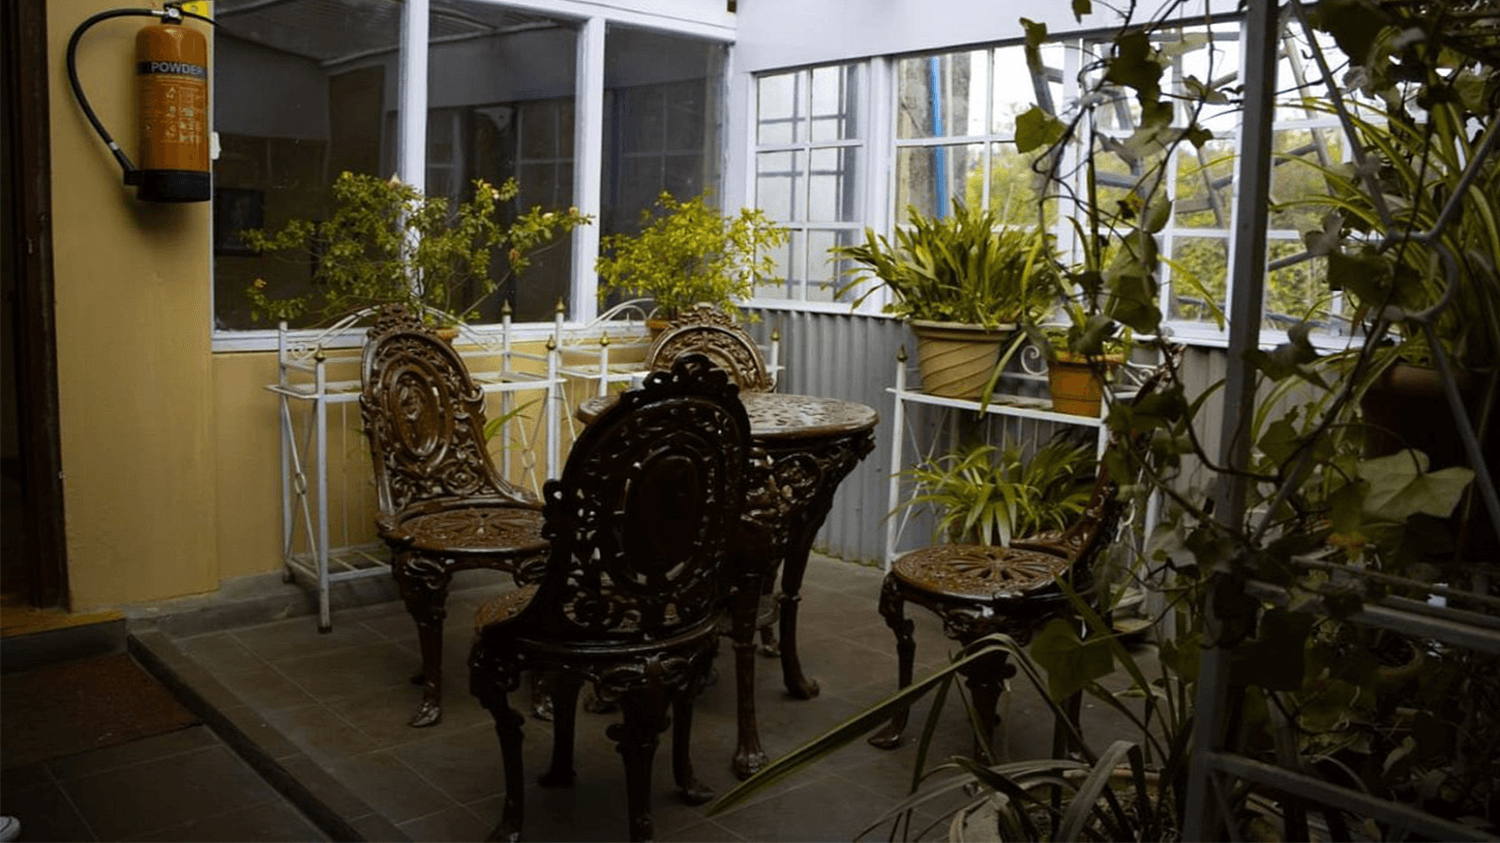 Travellers Inn, Kalimpong, West Bengal, India